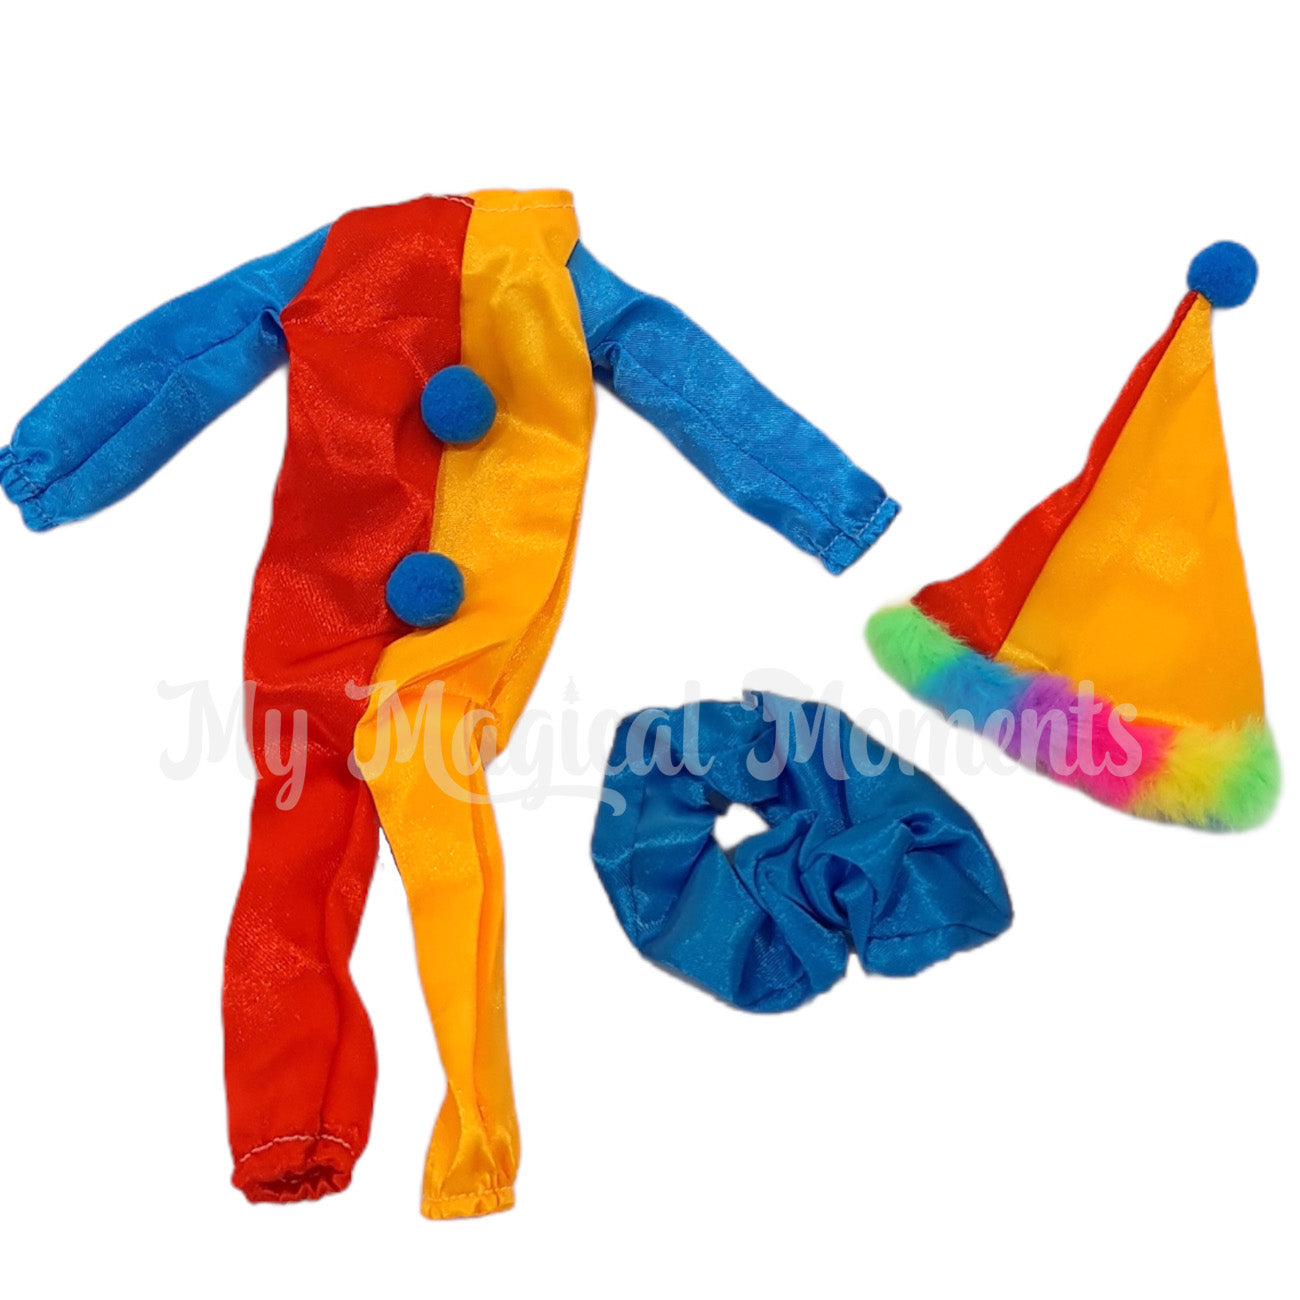 Red, yellow and blue clown costume for an elf with rainbow hair hat and neck frill.